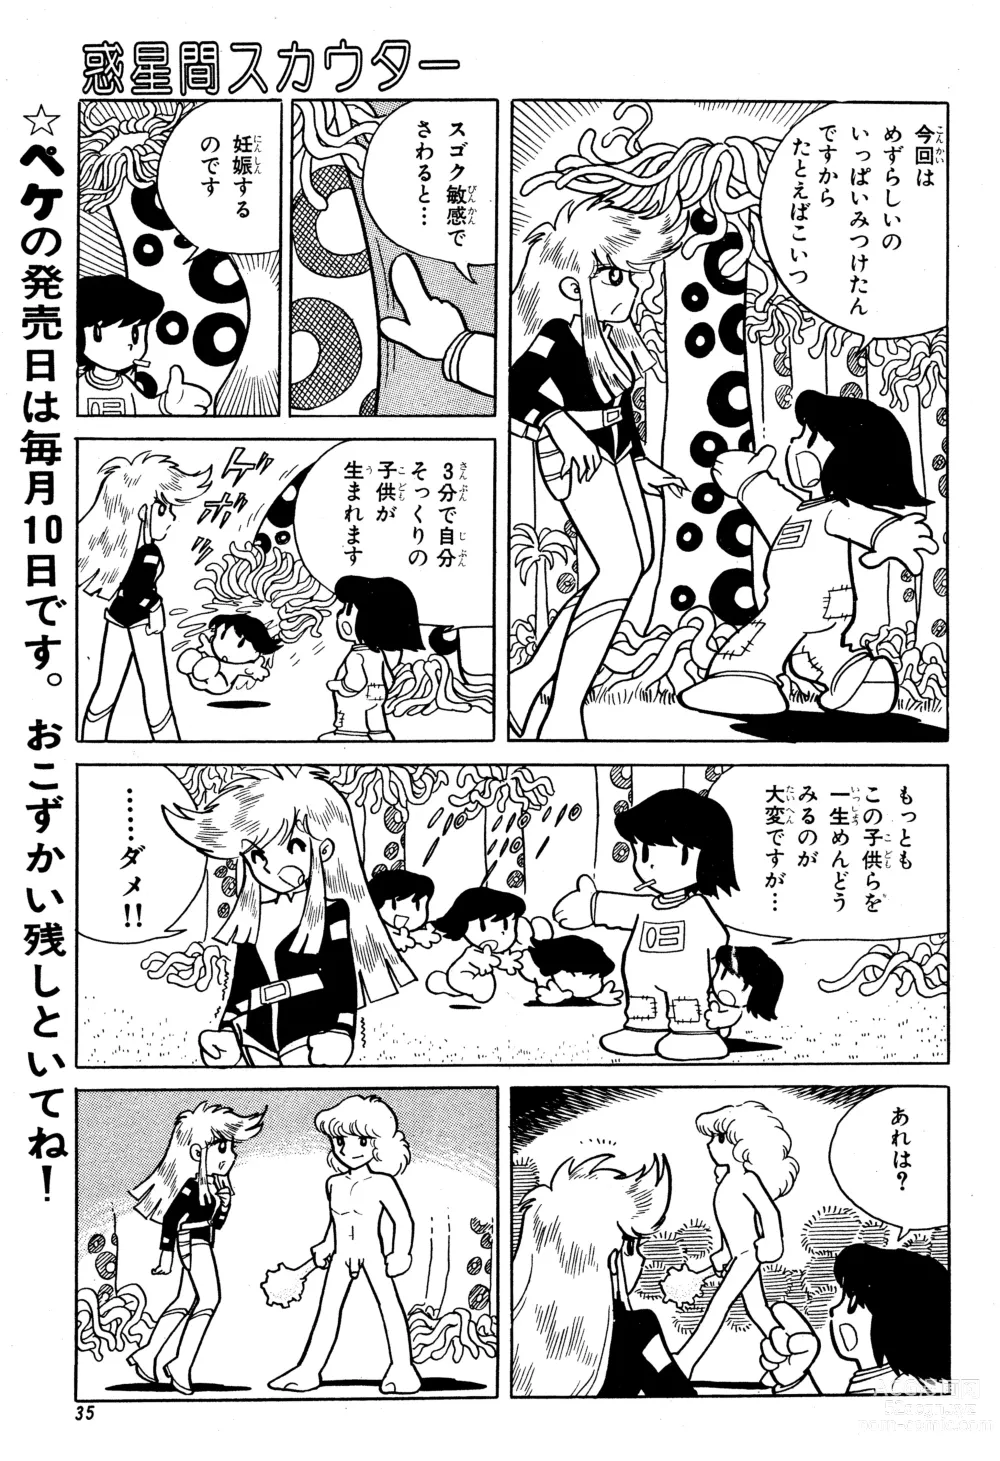 Page 4 of manga Dodemo inner space